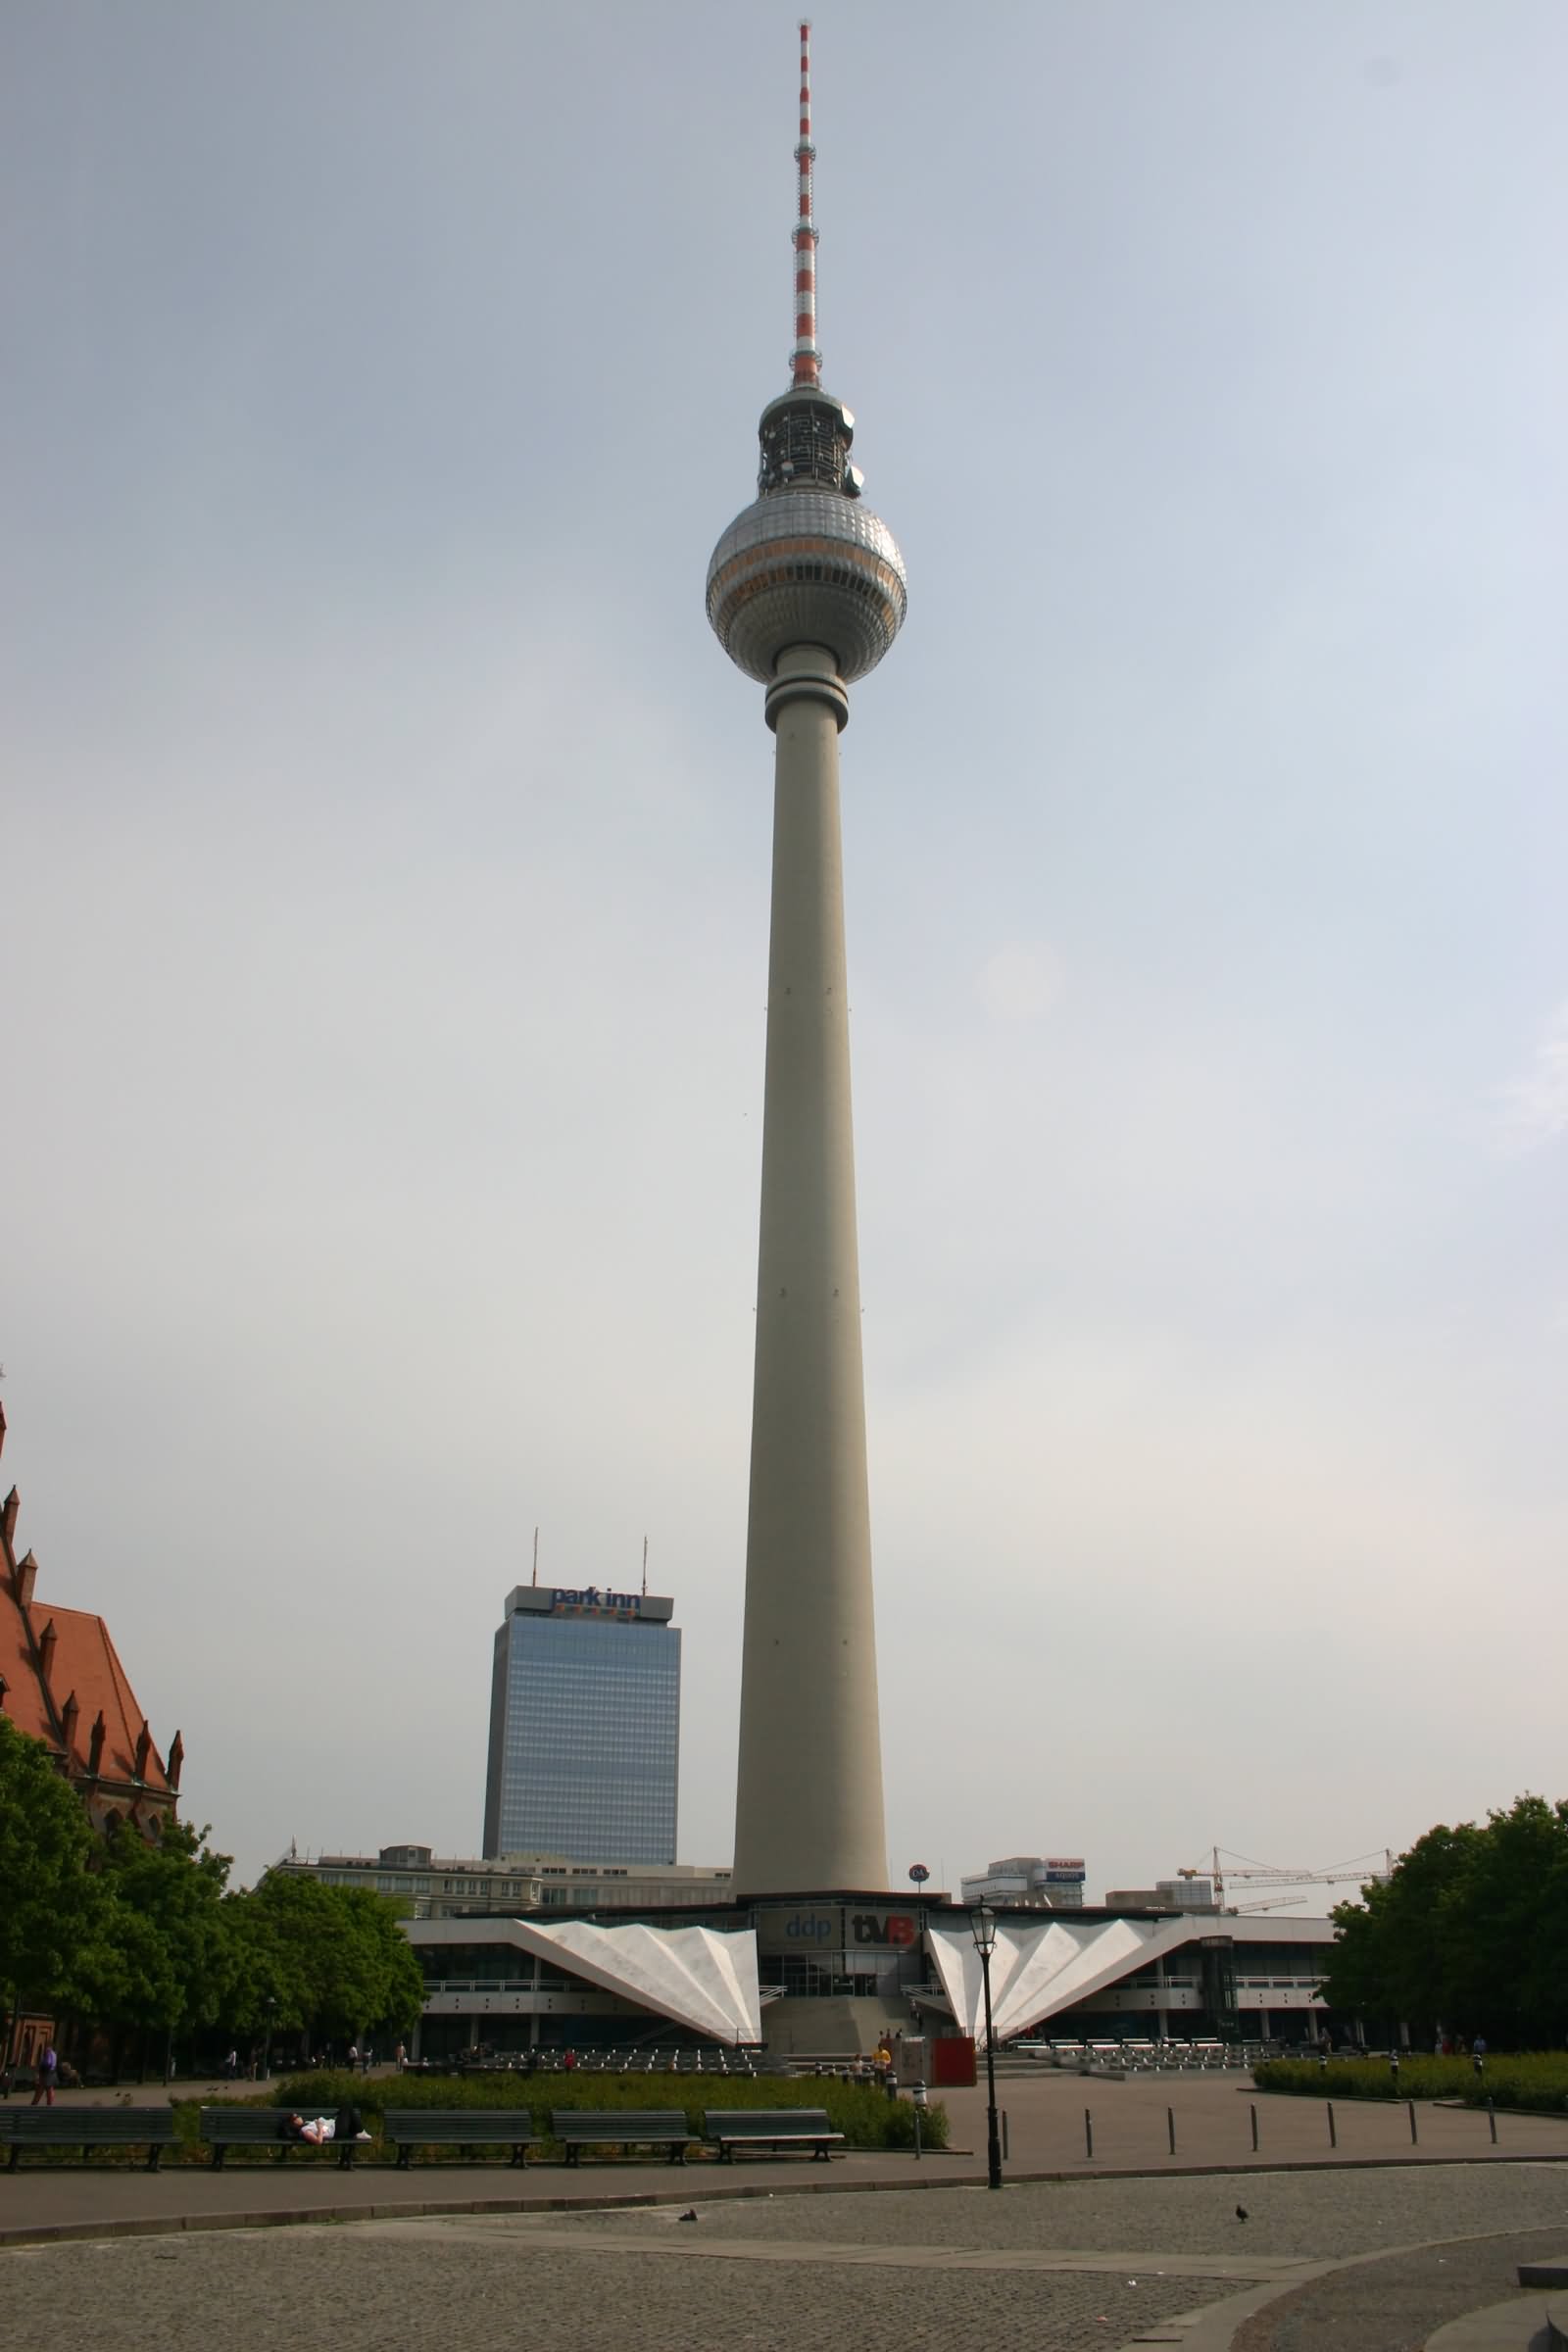 Beautiful Picture Of The Fernsehturm Tower In Berlin, Germany